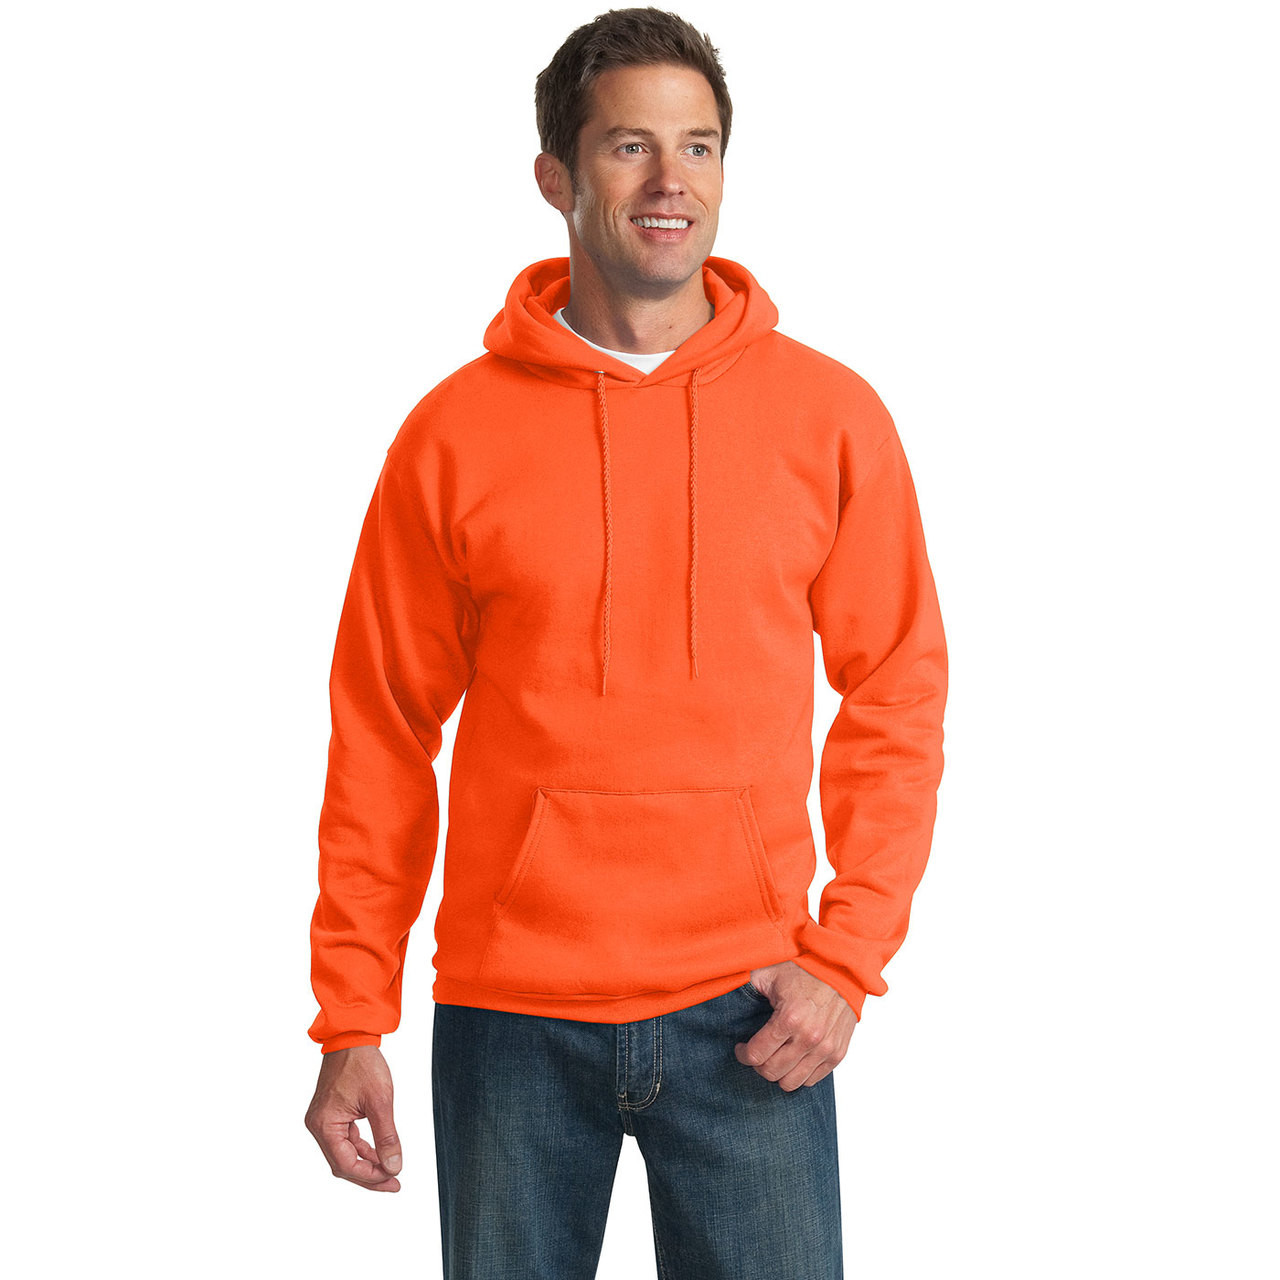 Port and Company Enhanced Visibility Hooded Sweatshirt PC90H